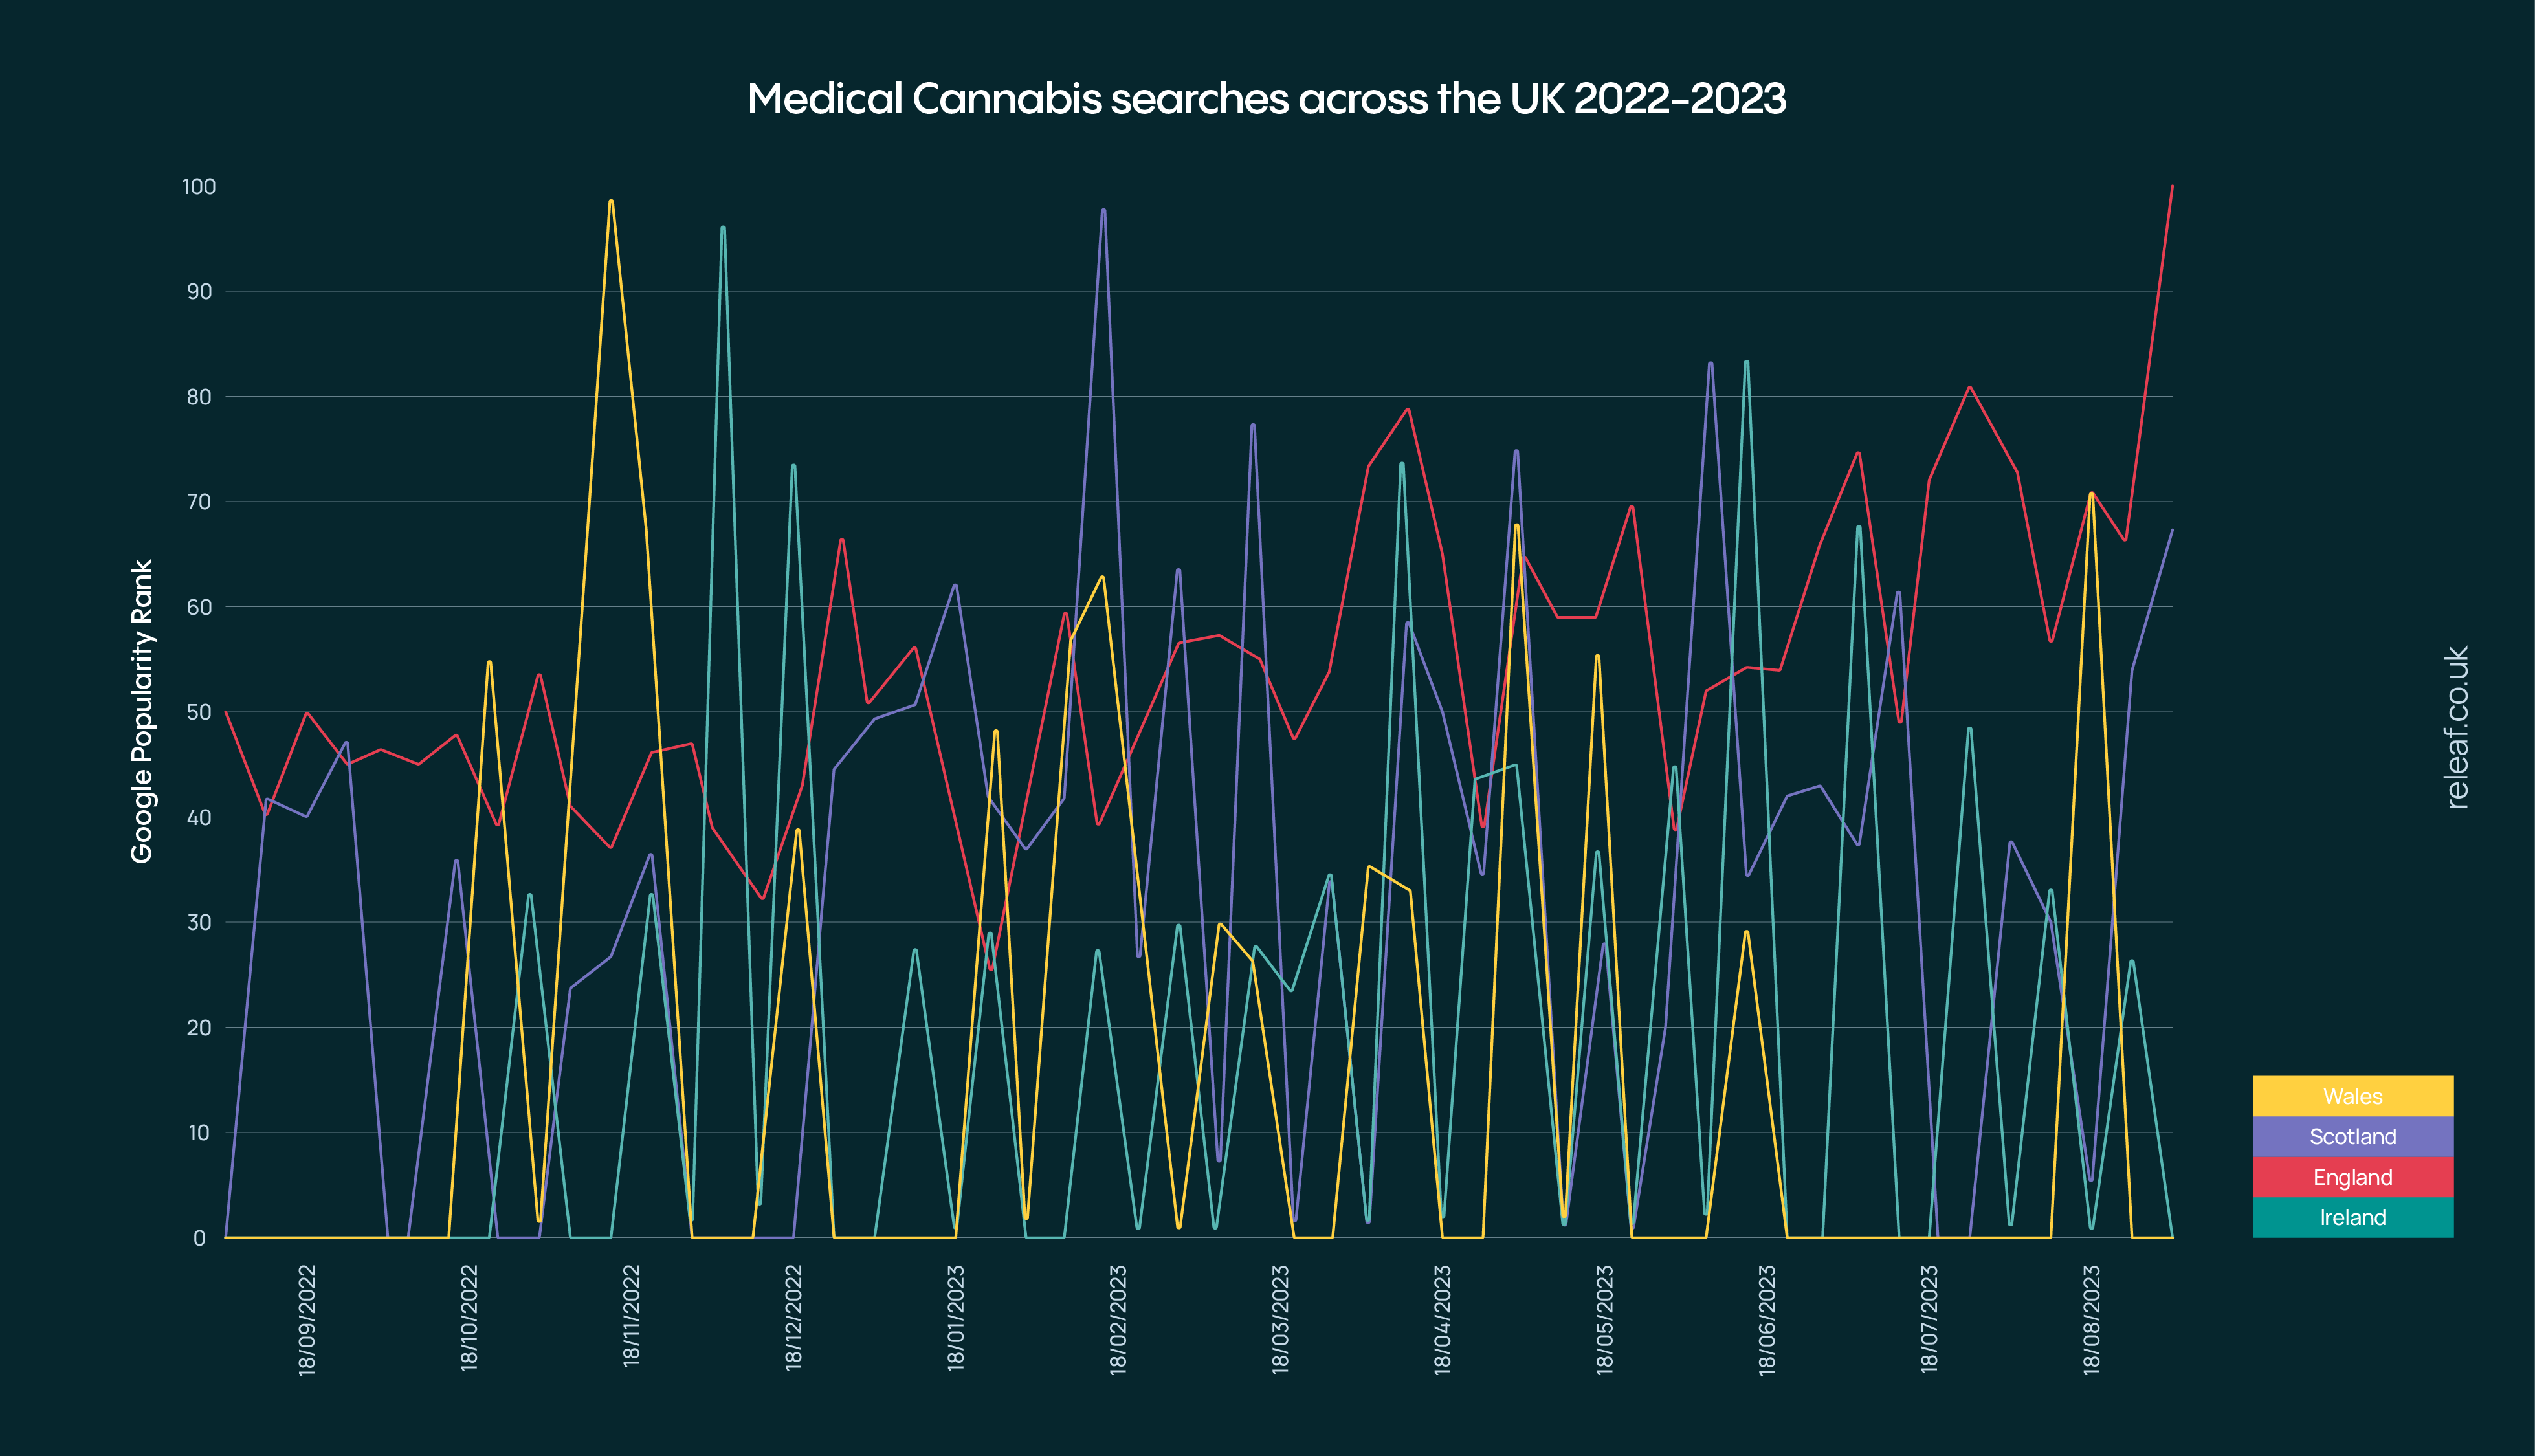 UK medical cannabis searches 2022 - 2023